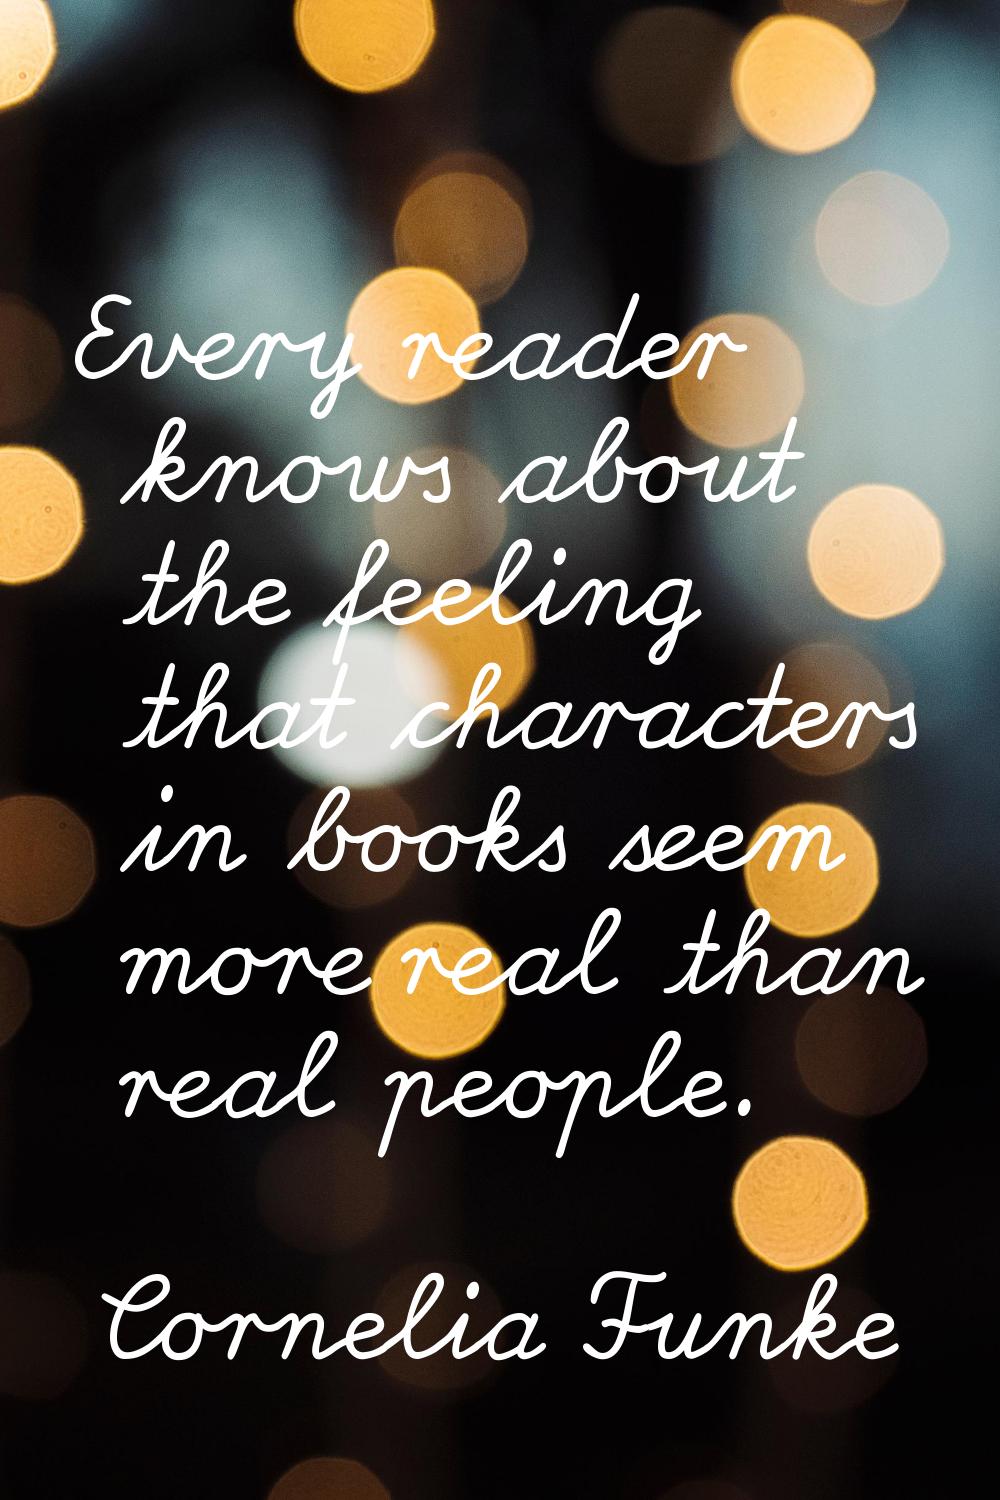 Every reader knows about the feeling that characters in books seem more real than real people.